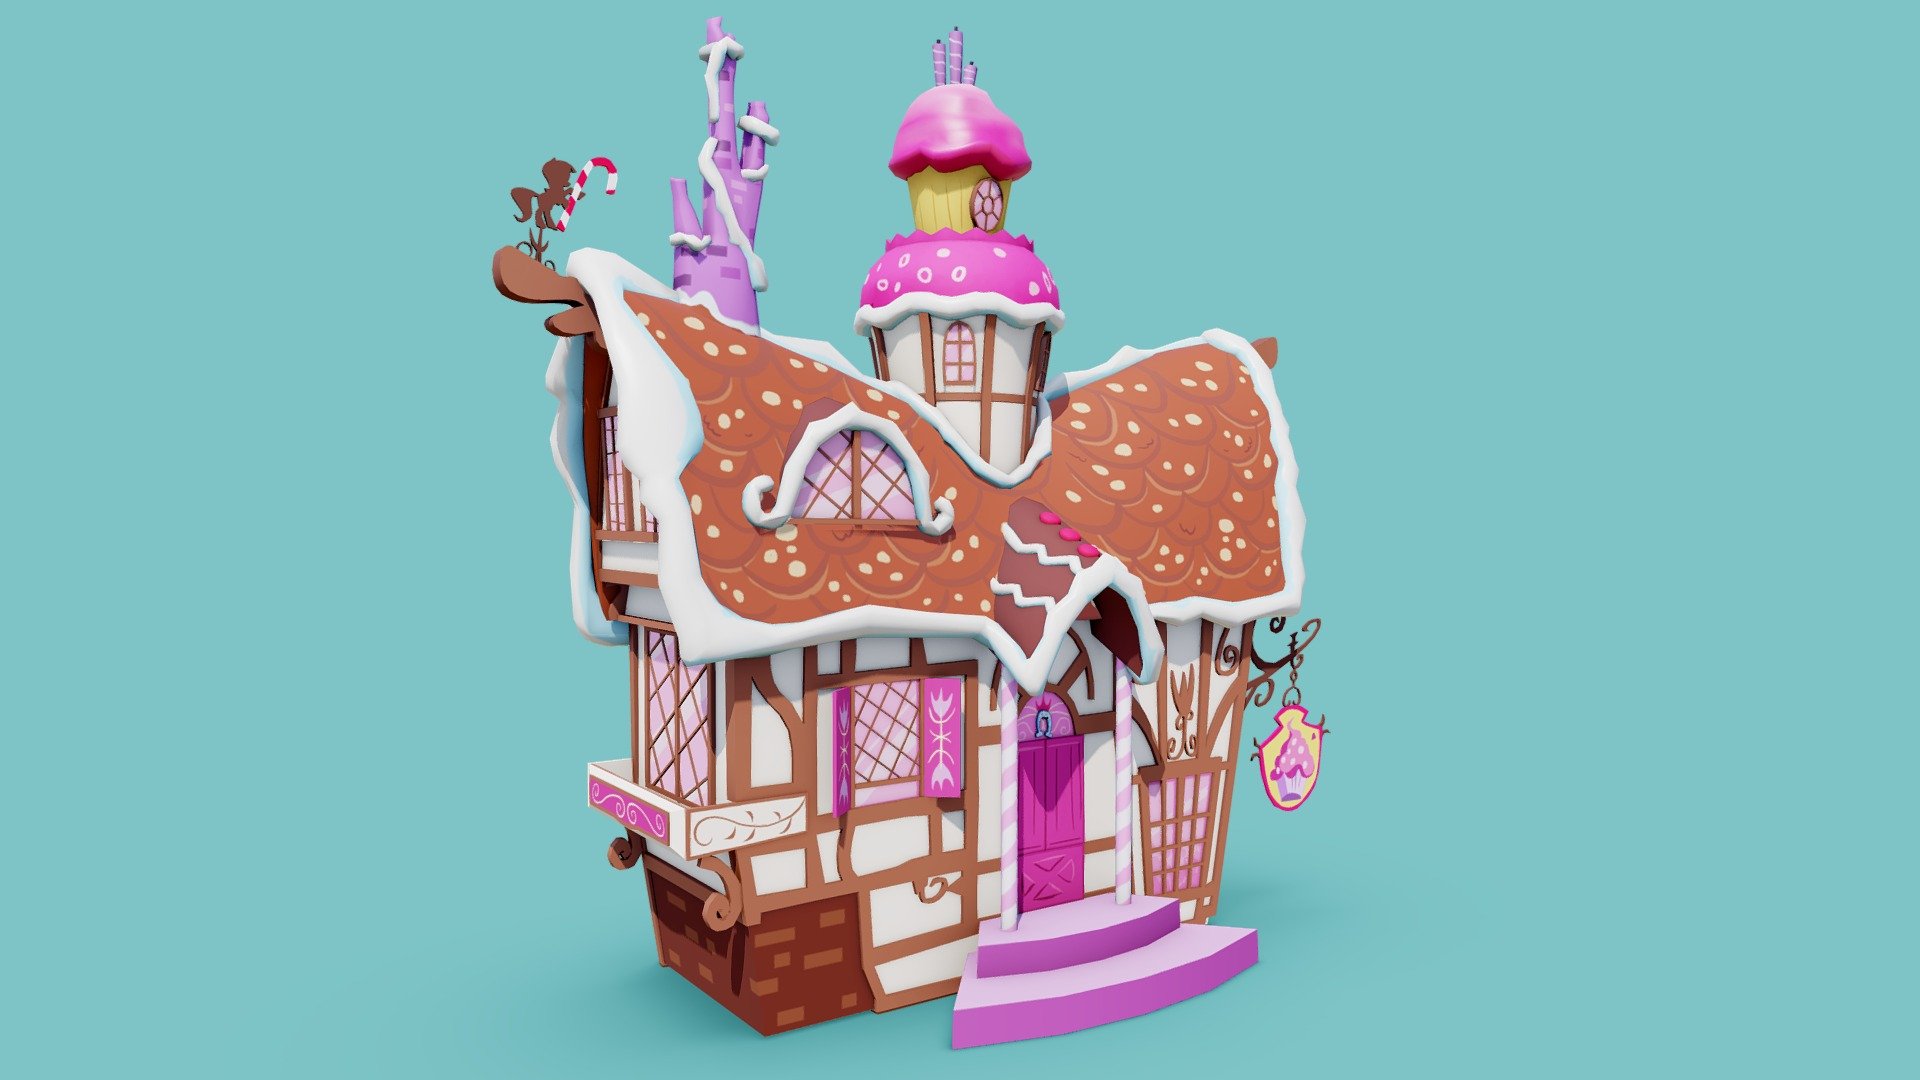 My 3D interpretation of the candy and sweets shop Sugarcube Corner from My Little Pony: Friendship is magic! 

This model was originally made in 2013 and has now been totally overhauled in 2020 with new UVs, better textures, and topology. (Originally my first model uploaded to Sketchfab!)

Model made in Blender, textures in Substance Painter 3d model